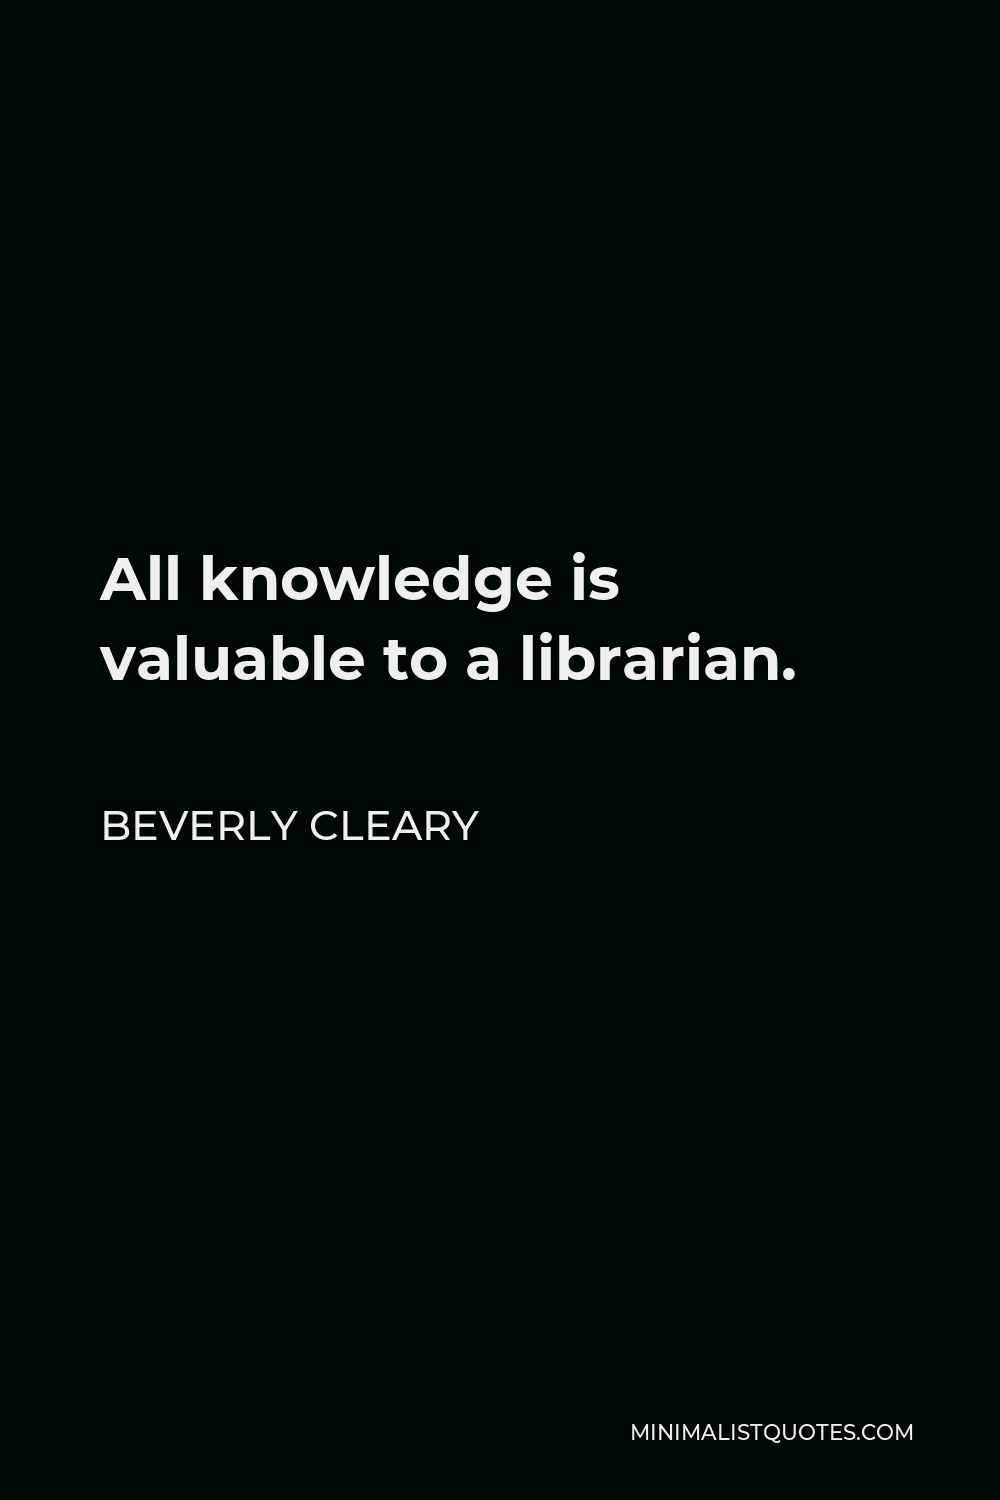 Beverly Cleary Quote - All knowledge is valuable to a librarian.